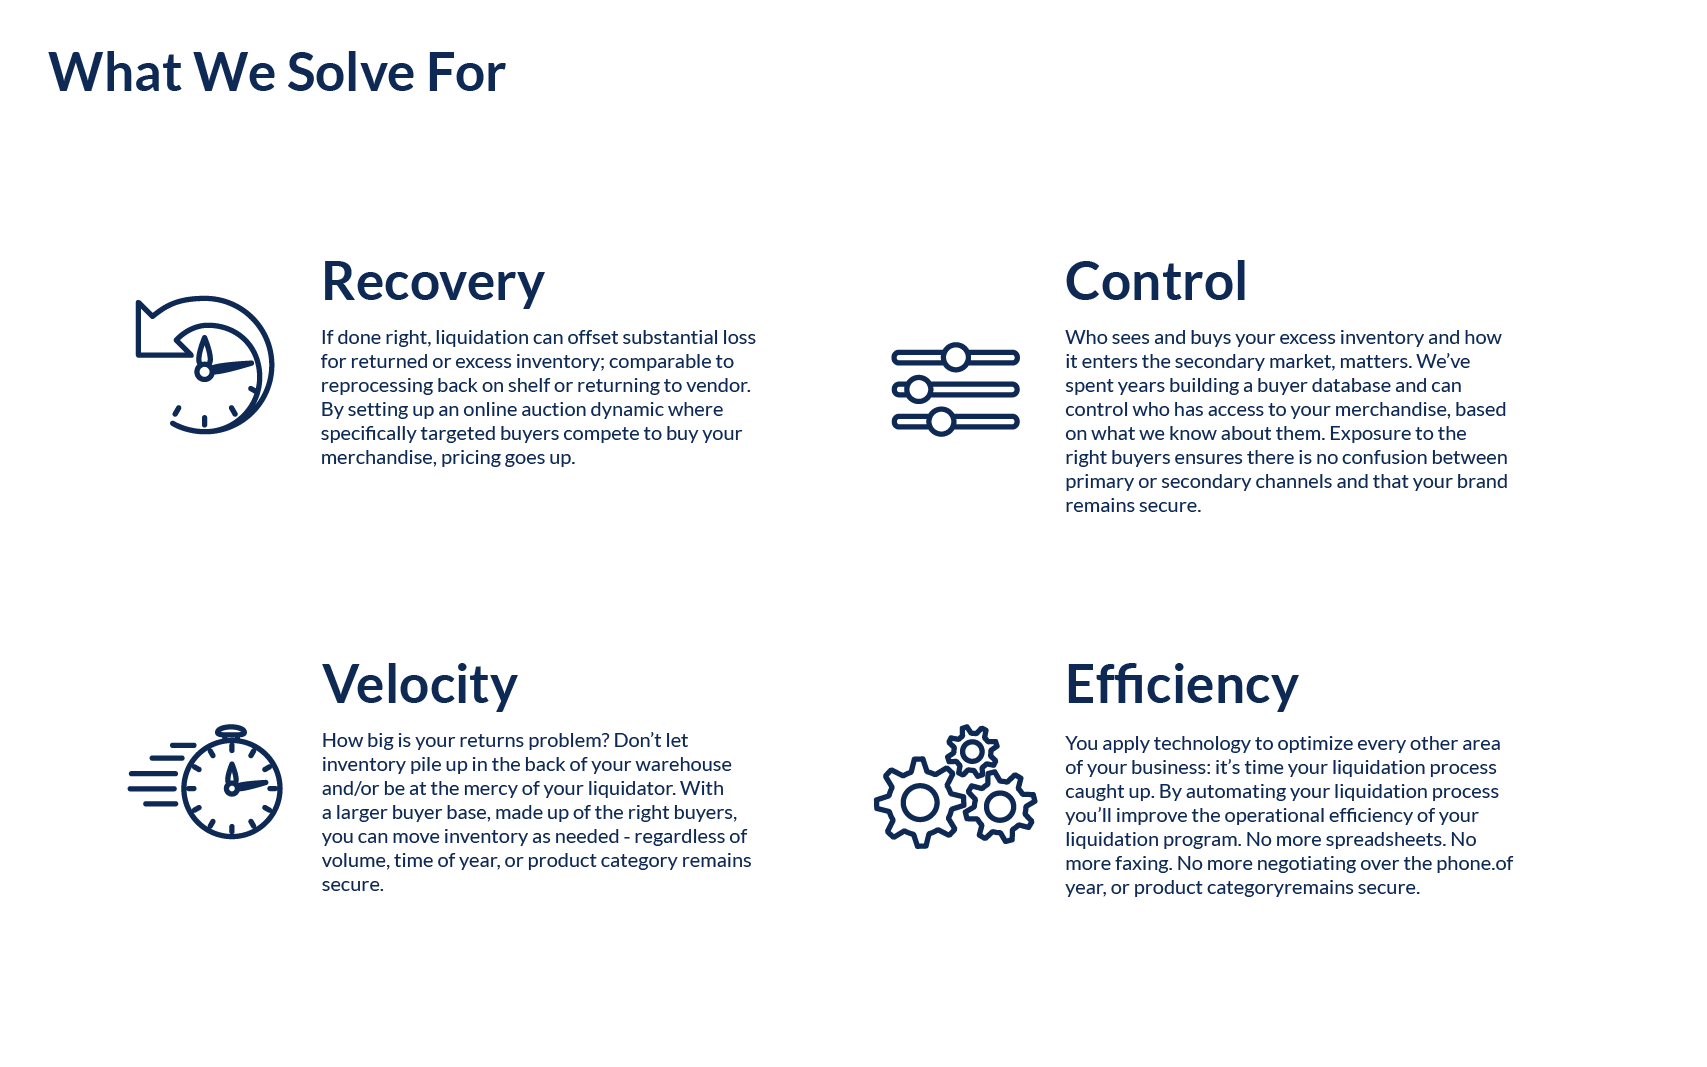 B-Stock Brand Guidelines7.png